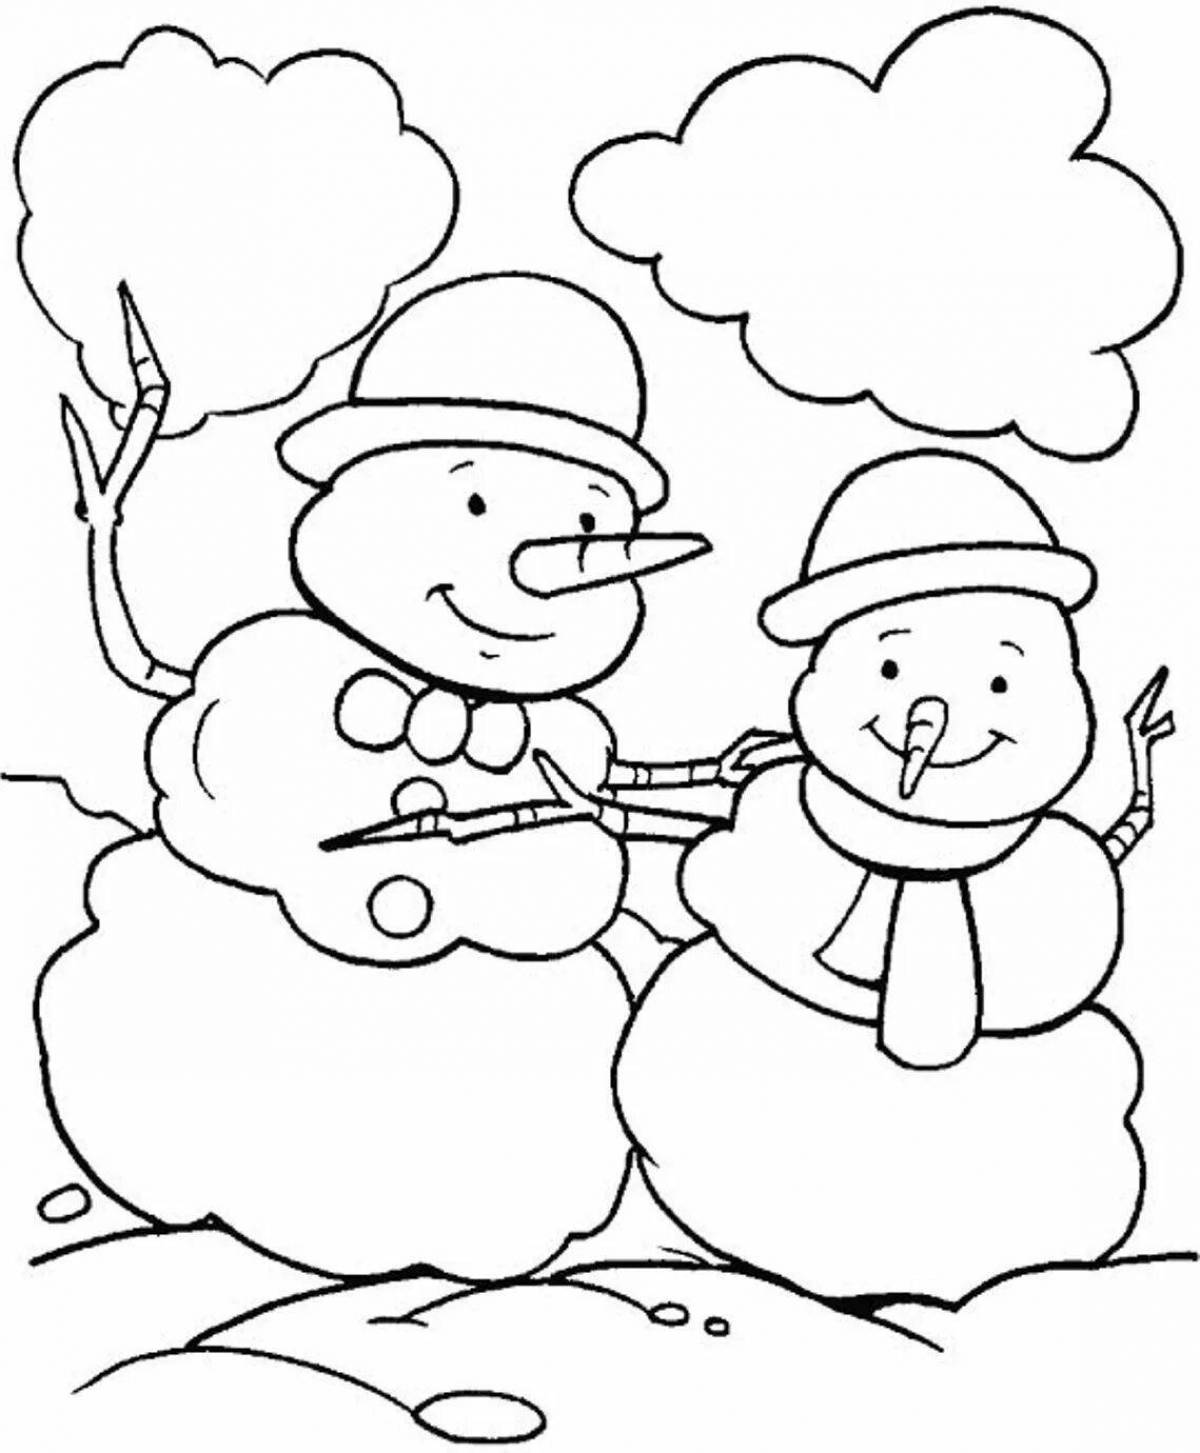 Great winter day coloring book